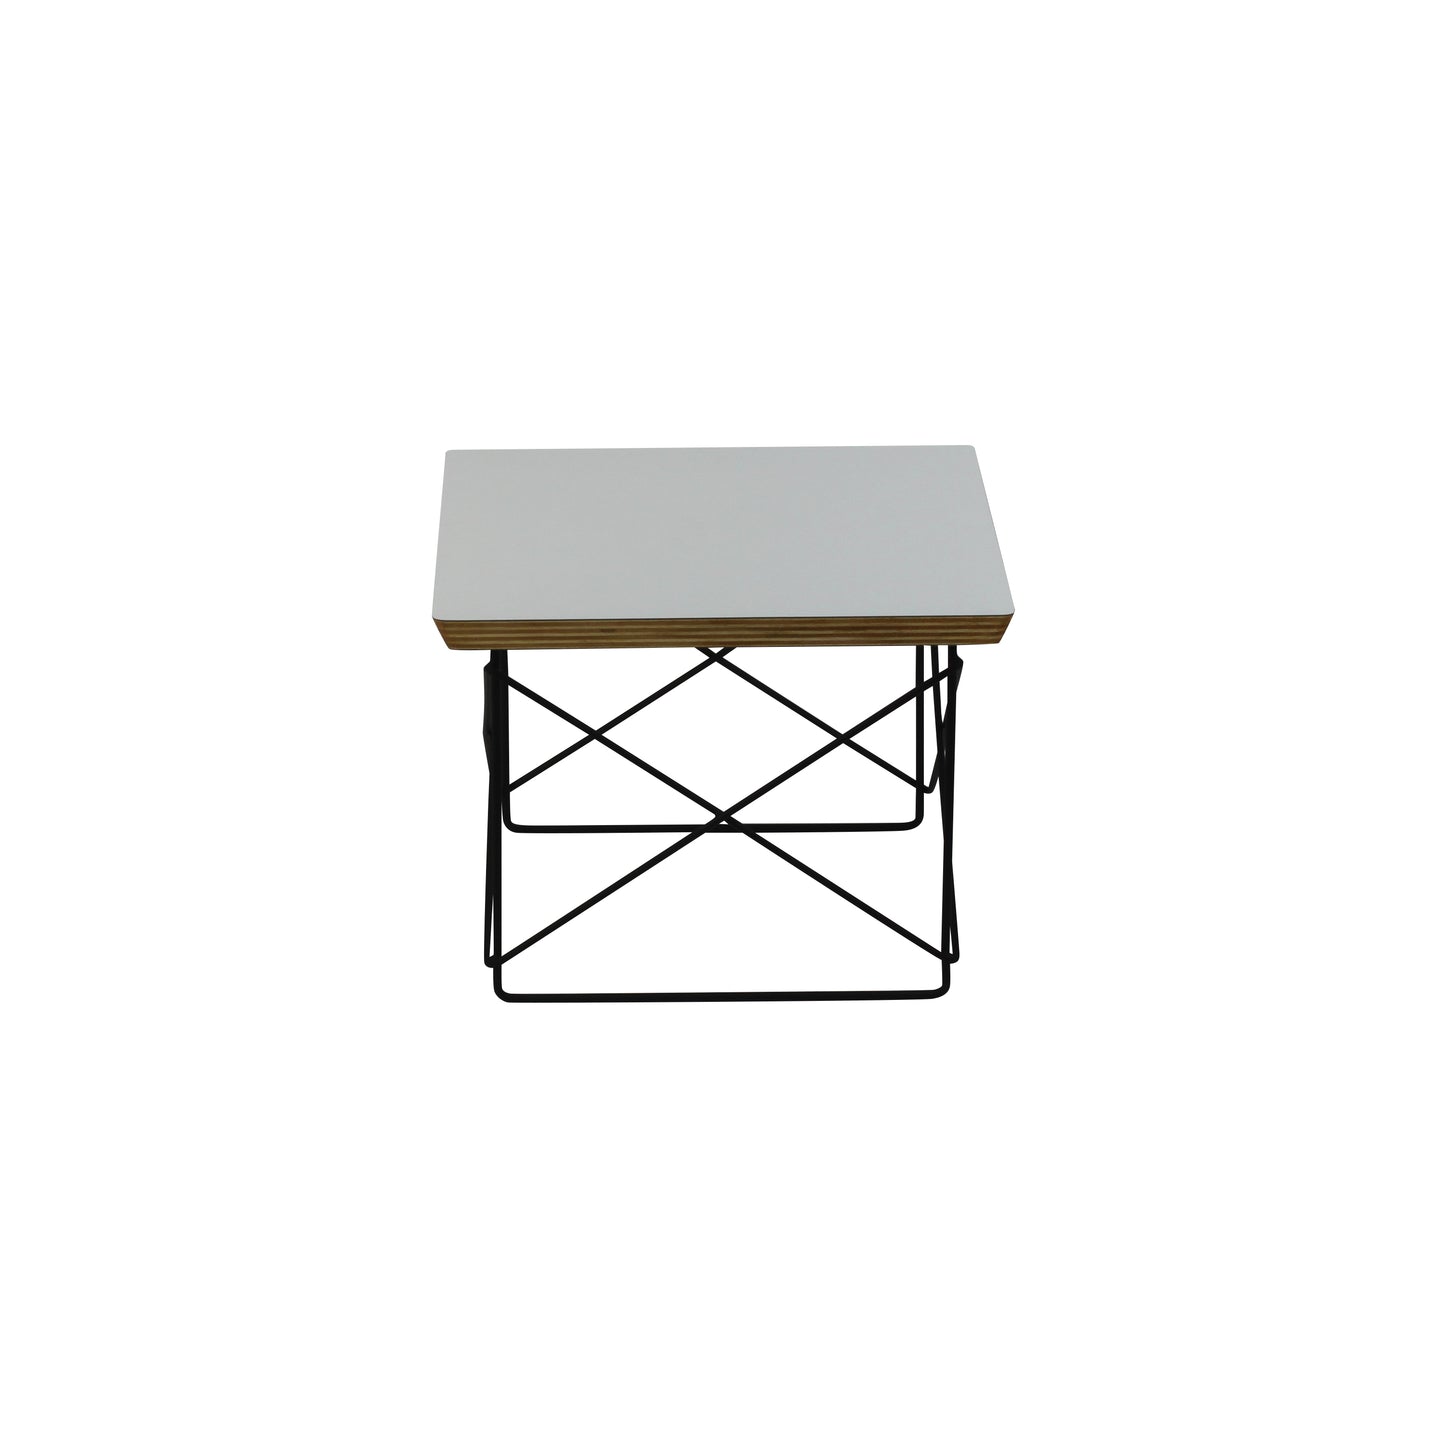 Eames style occasional table